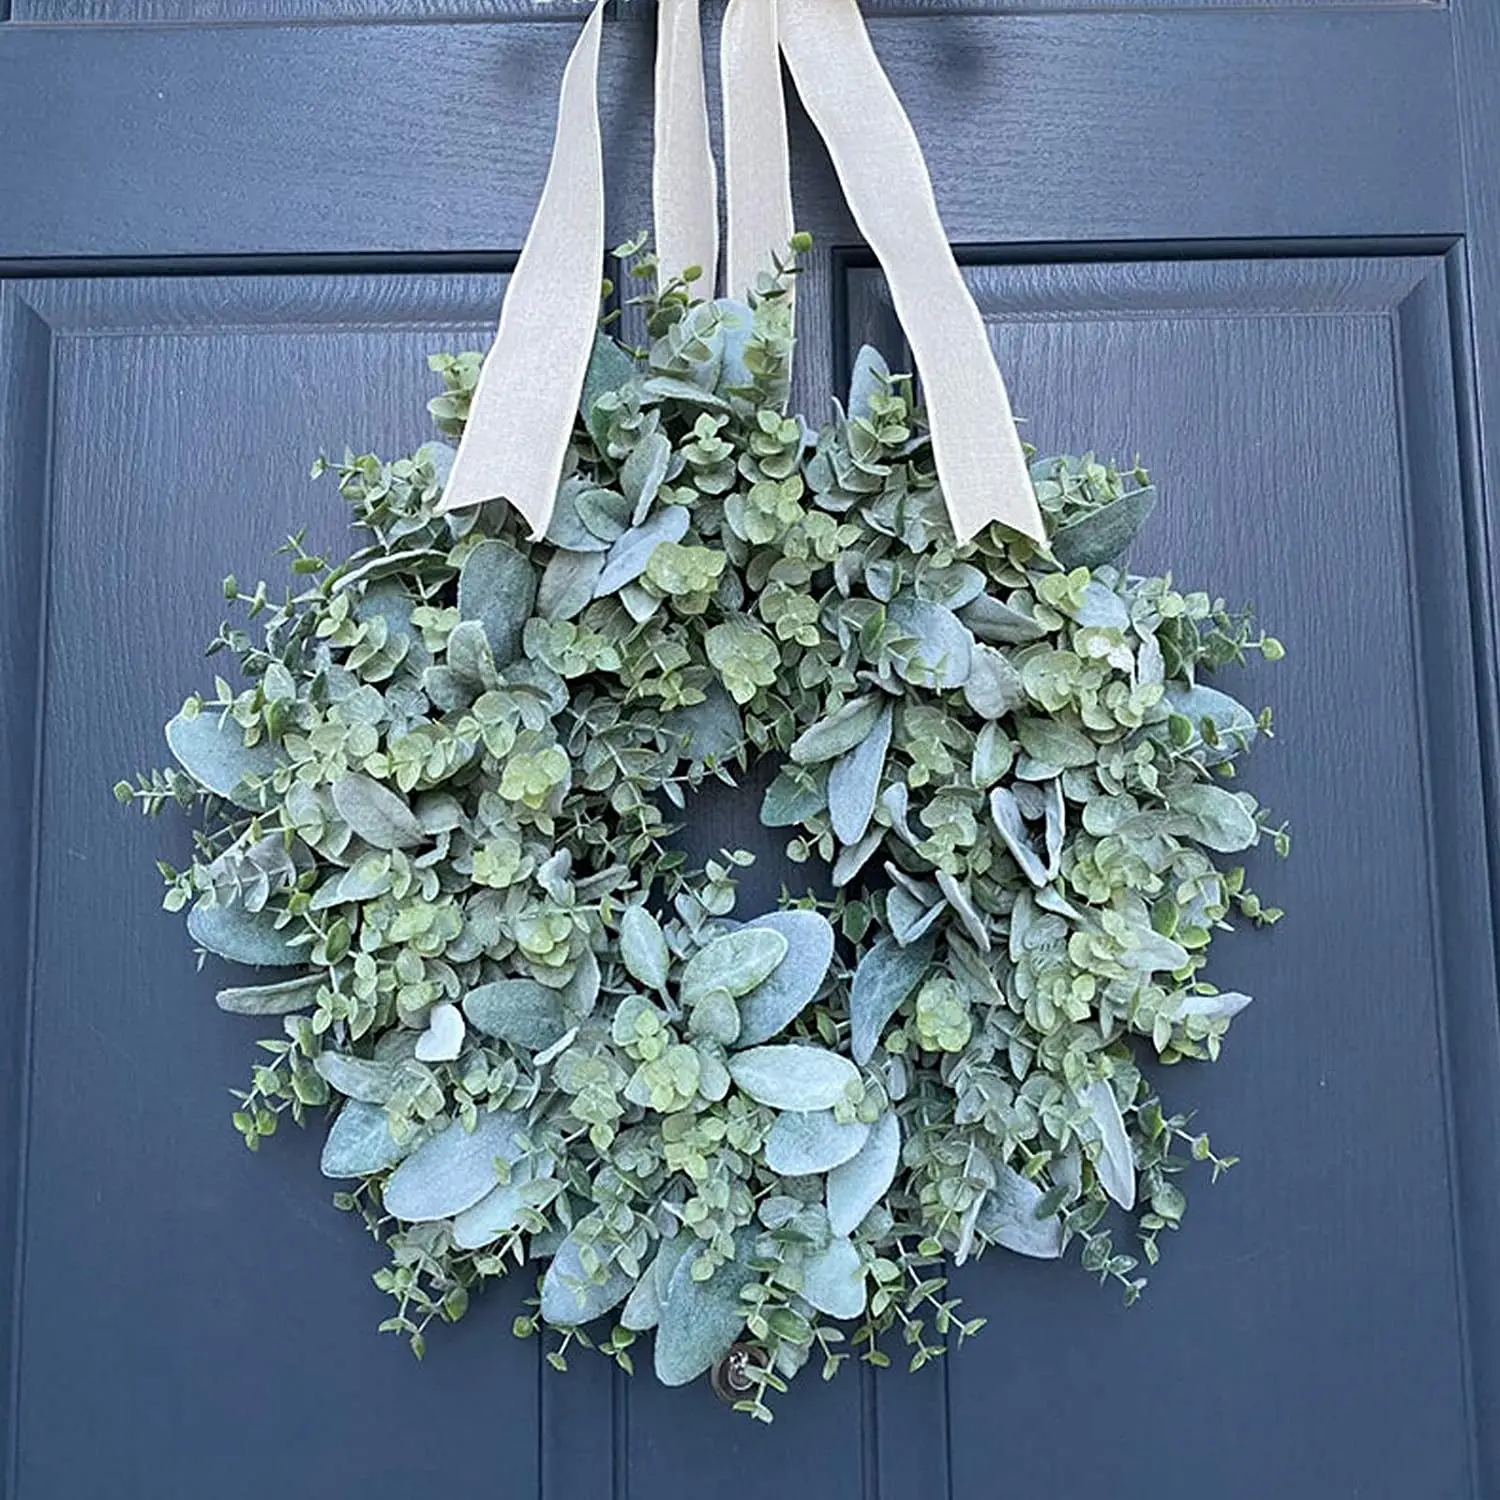 

5 Packs 30Ft Artificial Eucalyptus Garlands Fake Greenery Vines Faux Hanging Plants for Wedding Table Backdrop Arch